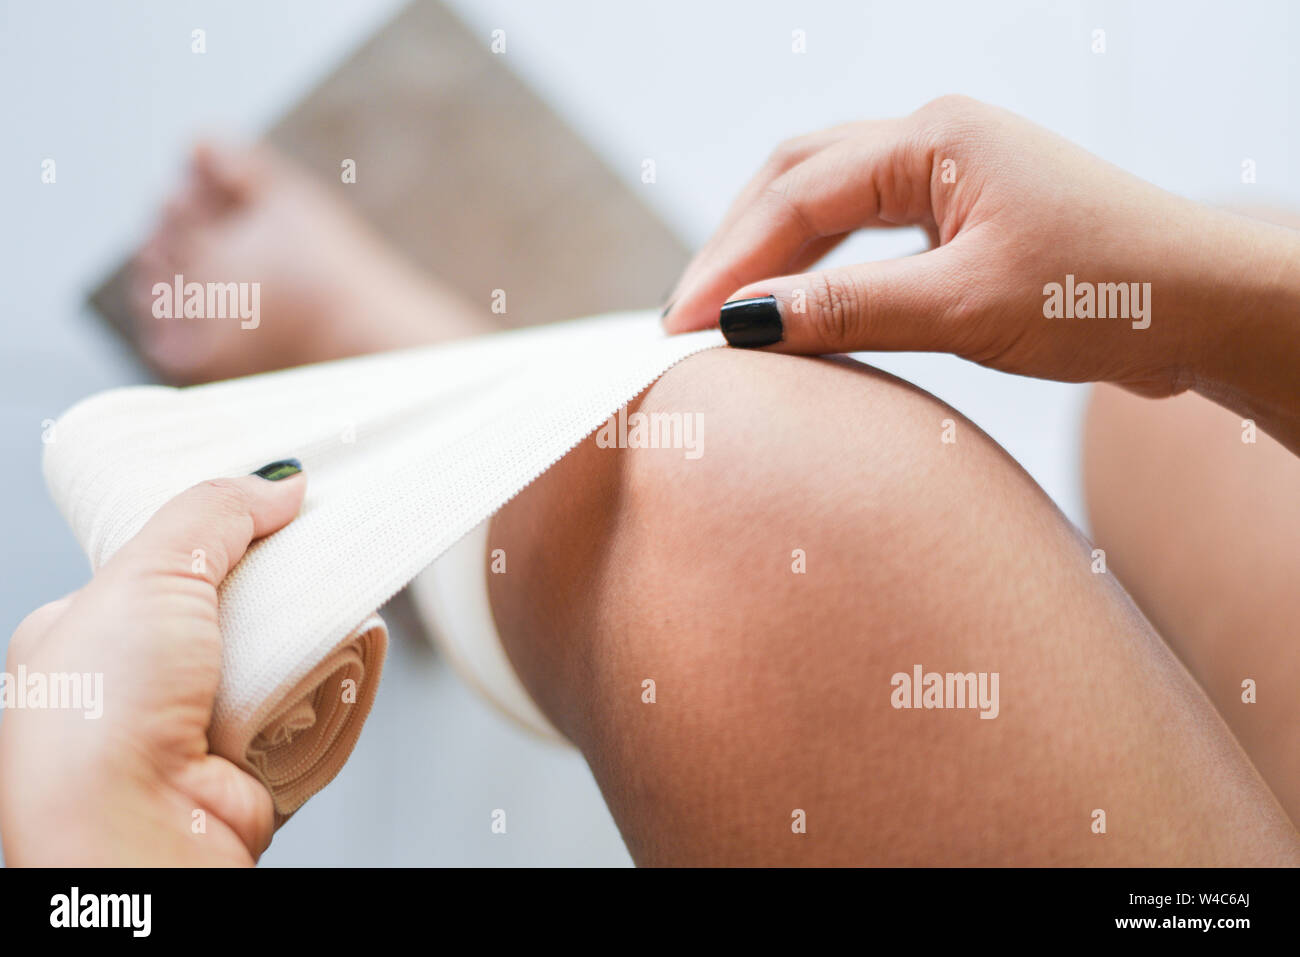 wound bandaging an injured knee sprains / first aid leg injury health care and medicine concept Stock Photo